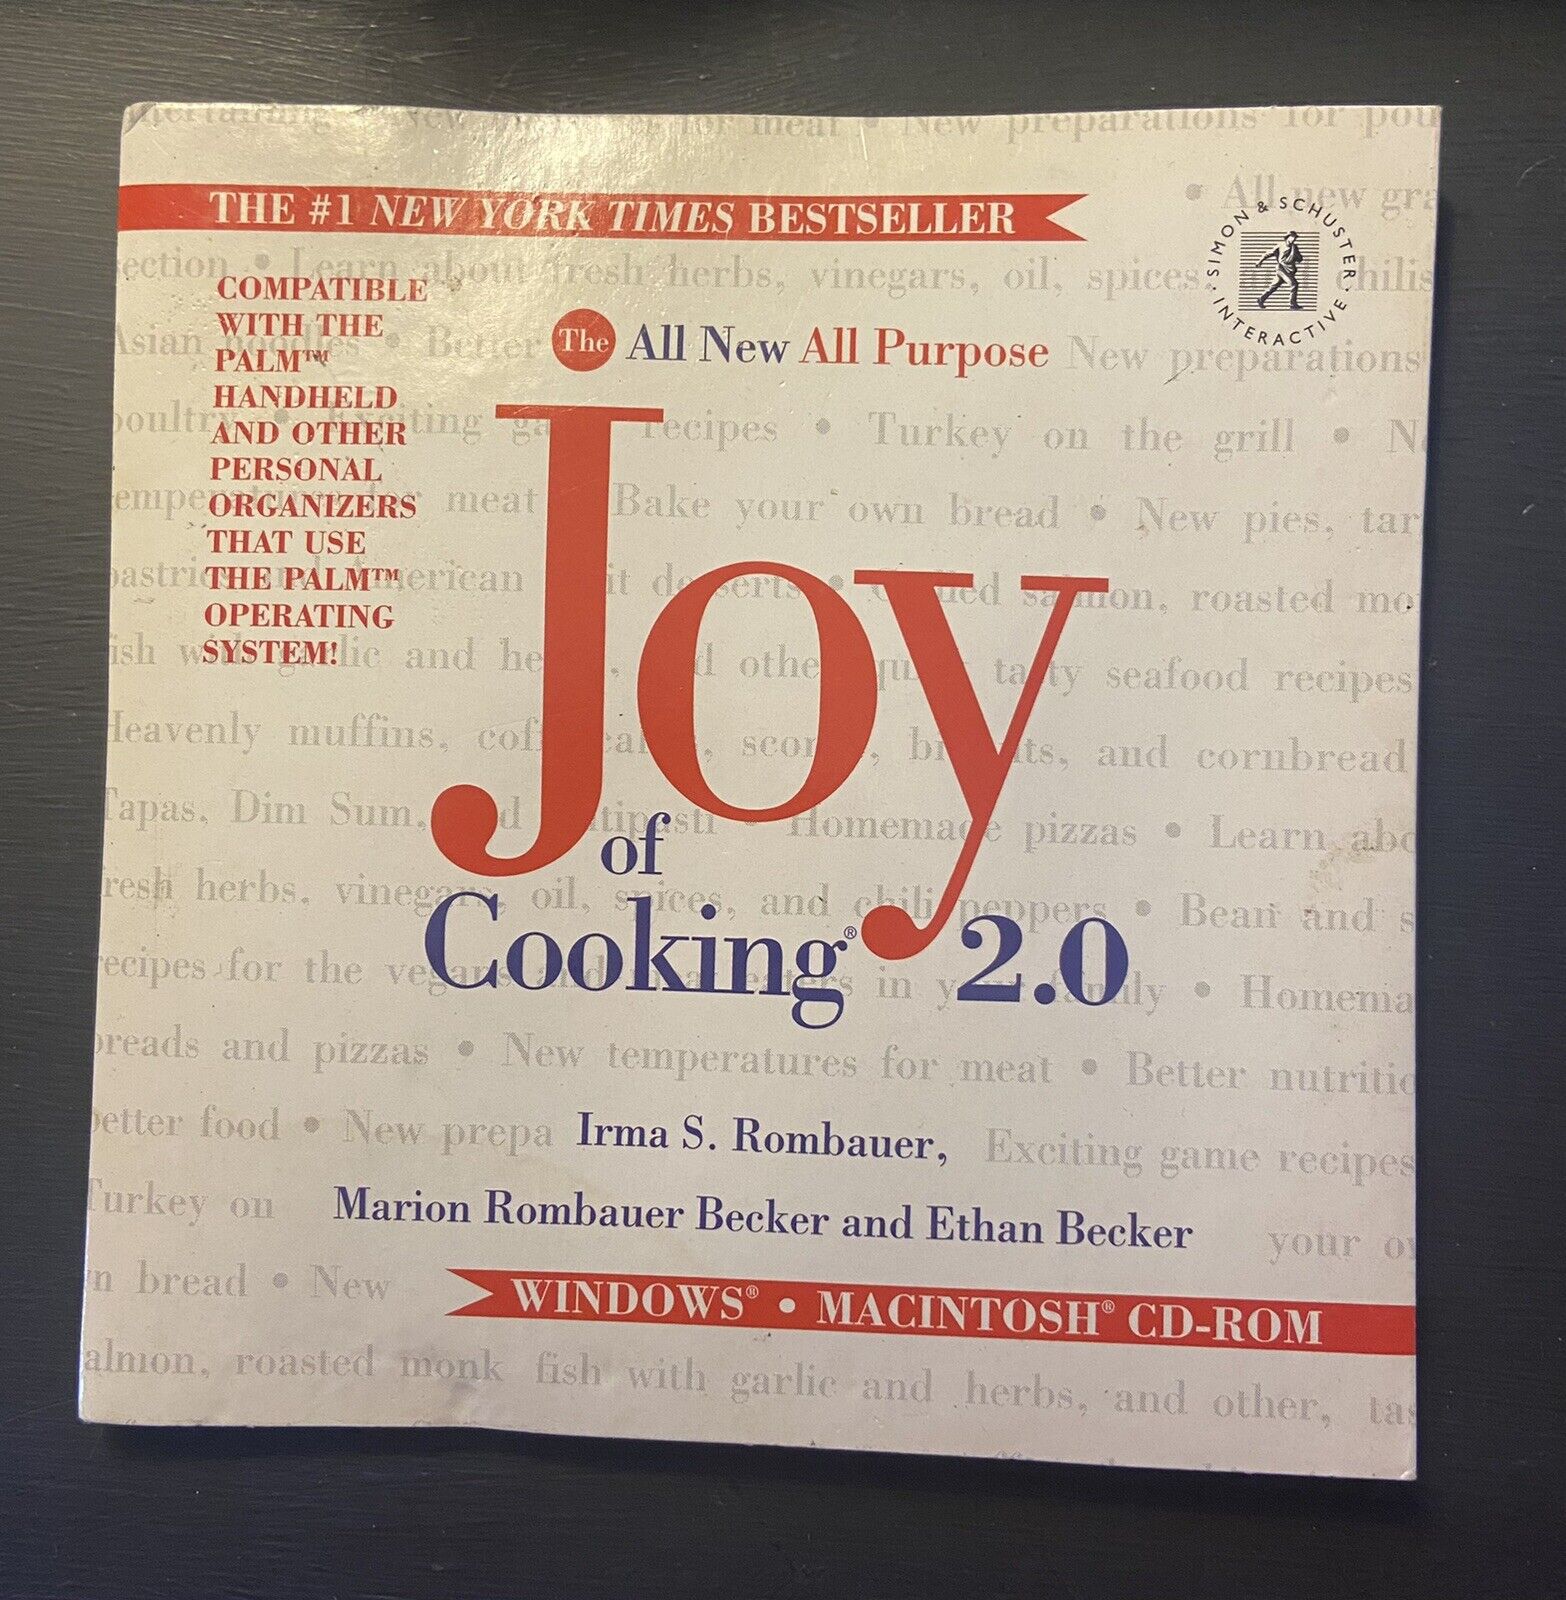 The Joy of Cooking 2.0 PC MAC CD learn Cook meal, culinary 2,500 recipes, menu 